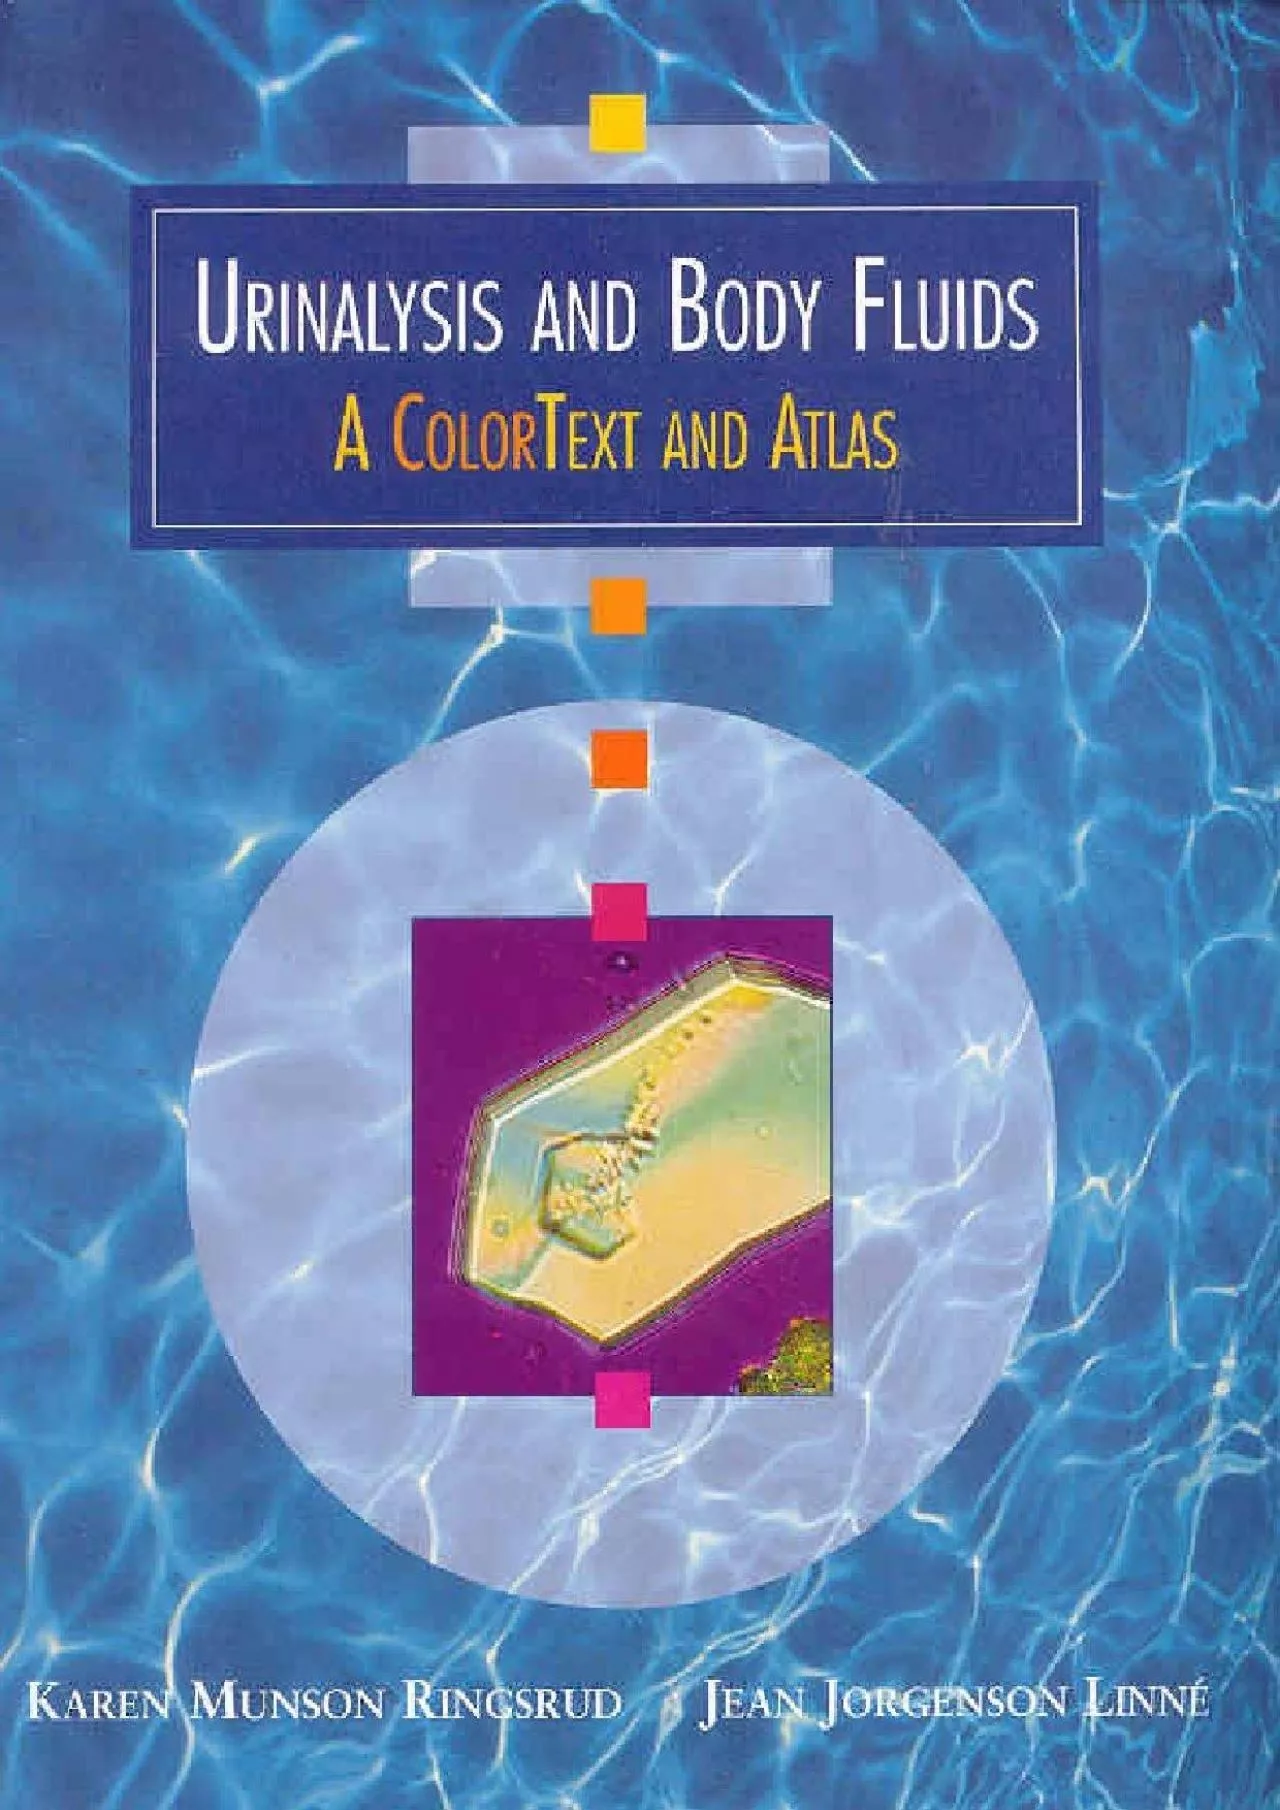 (DOWNLOAD)-Urinalysis and Body Fluids: A Colortext and Atlas